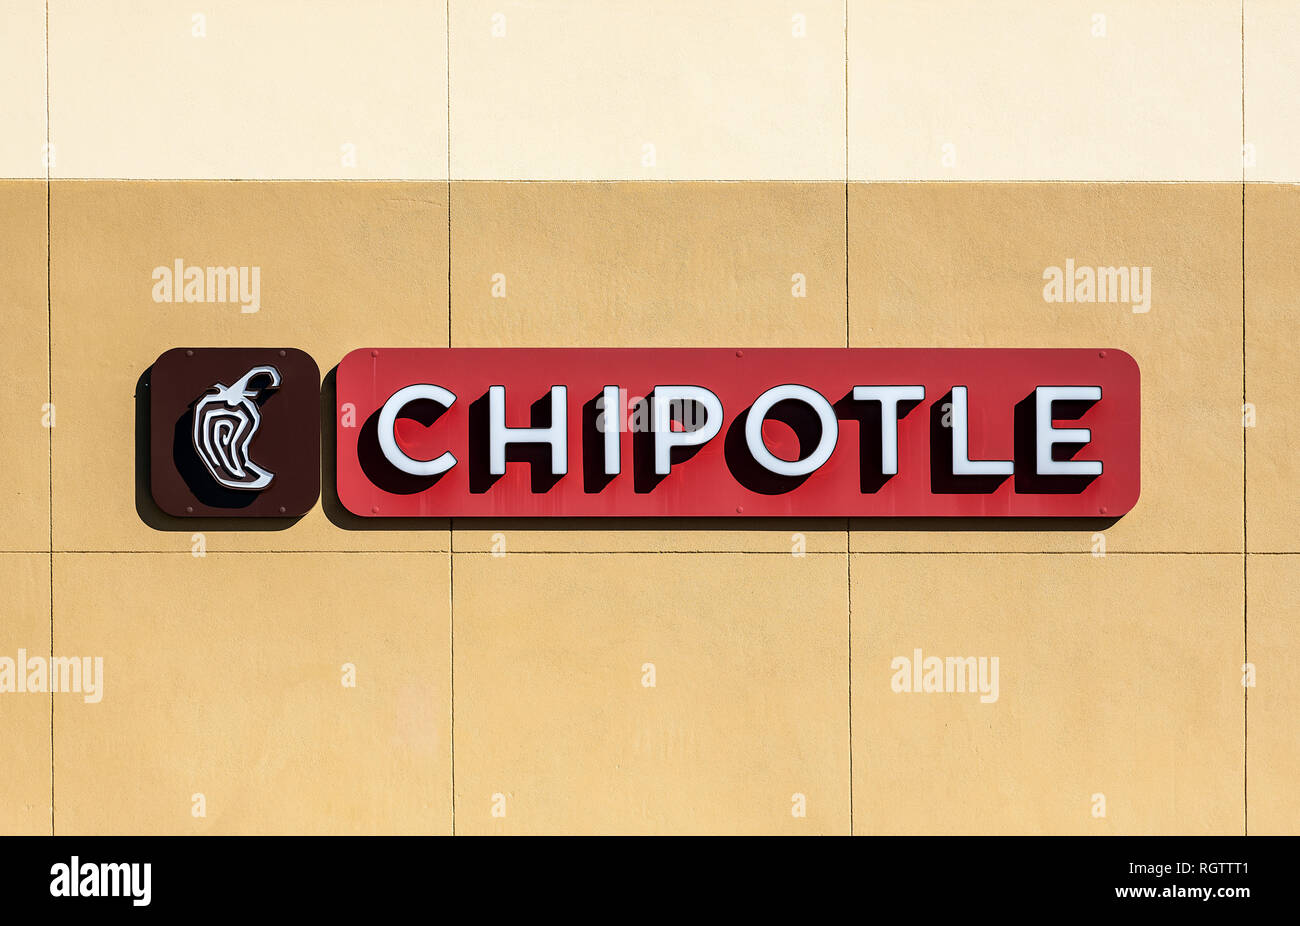 Chipotle Mexican Grill, logo and sign. Stock Photo